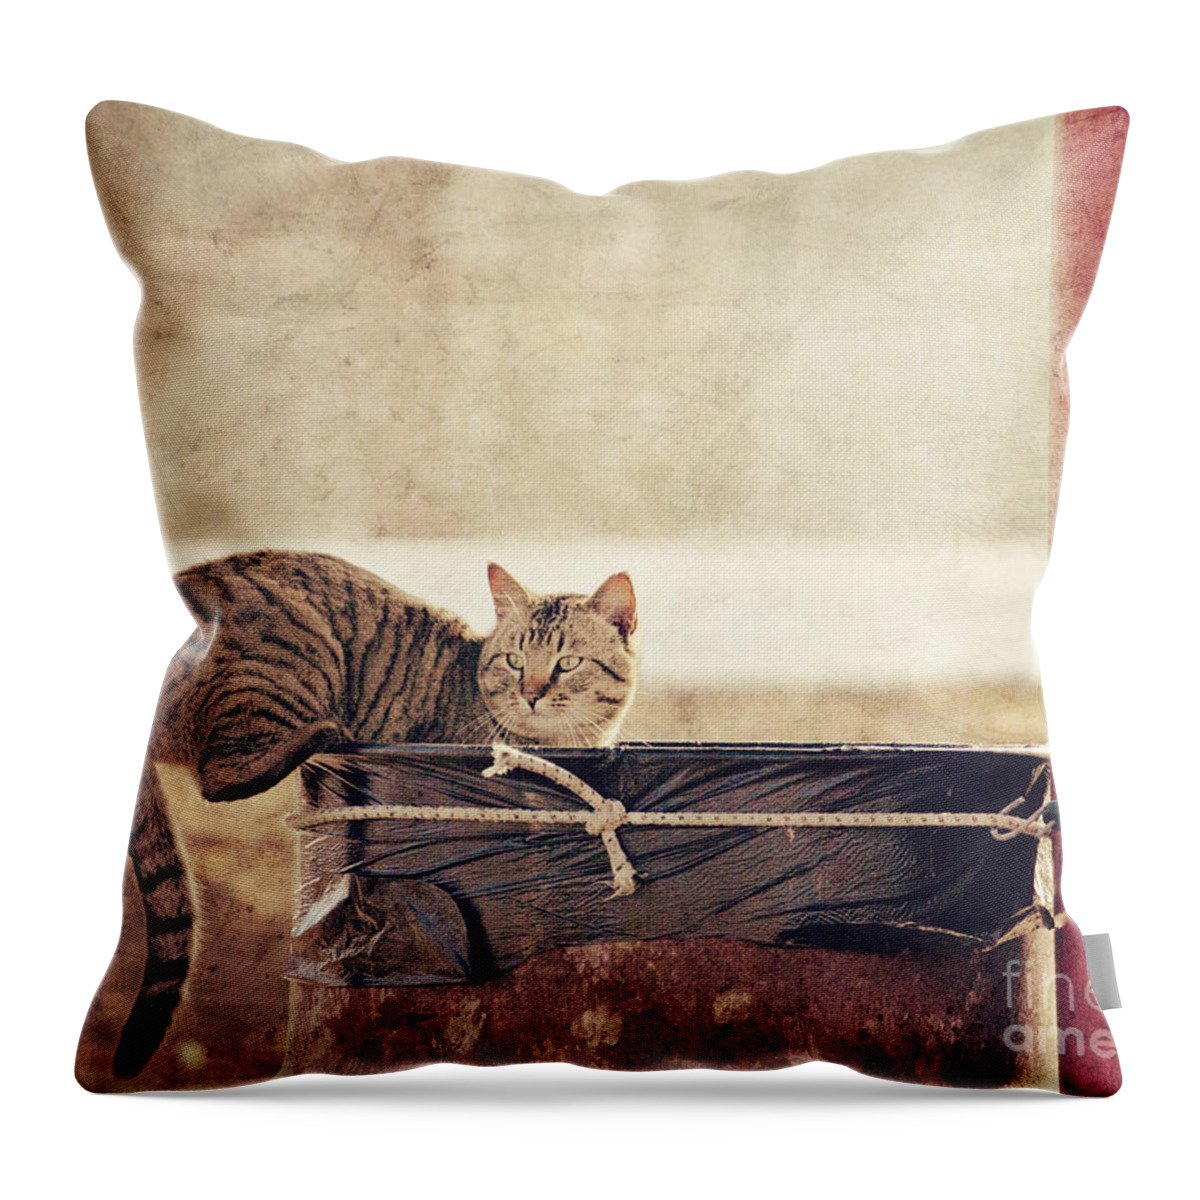 Cat Throw Pillow featuring the photograph Dumpster Diver by Pam Holdsworth